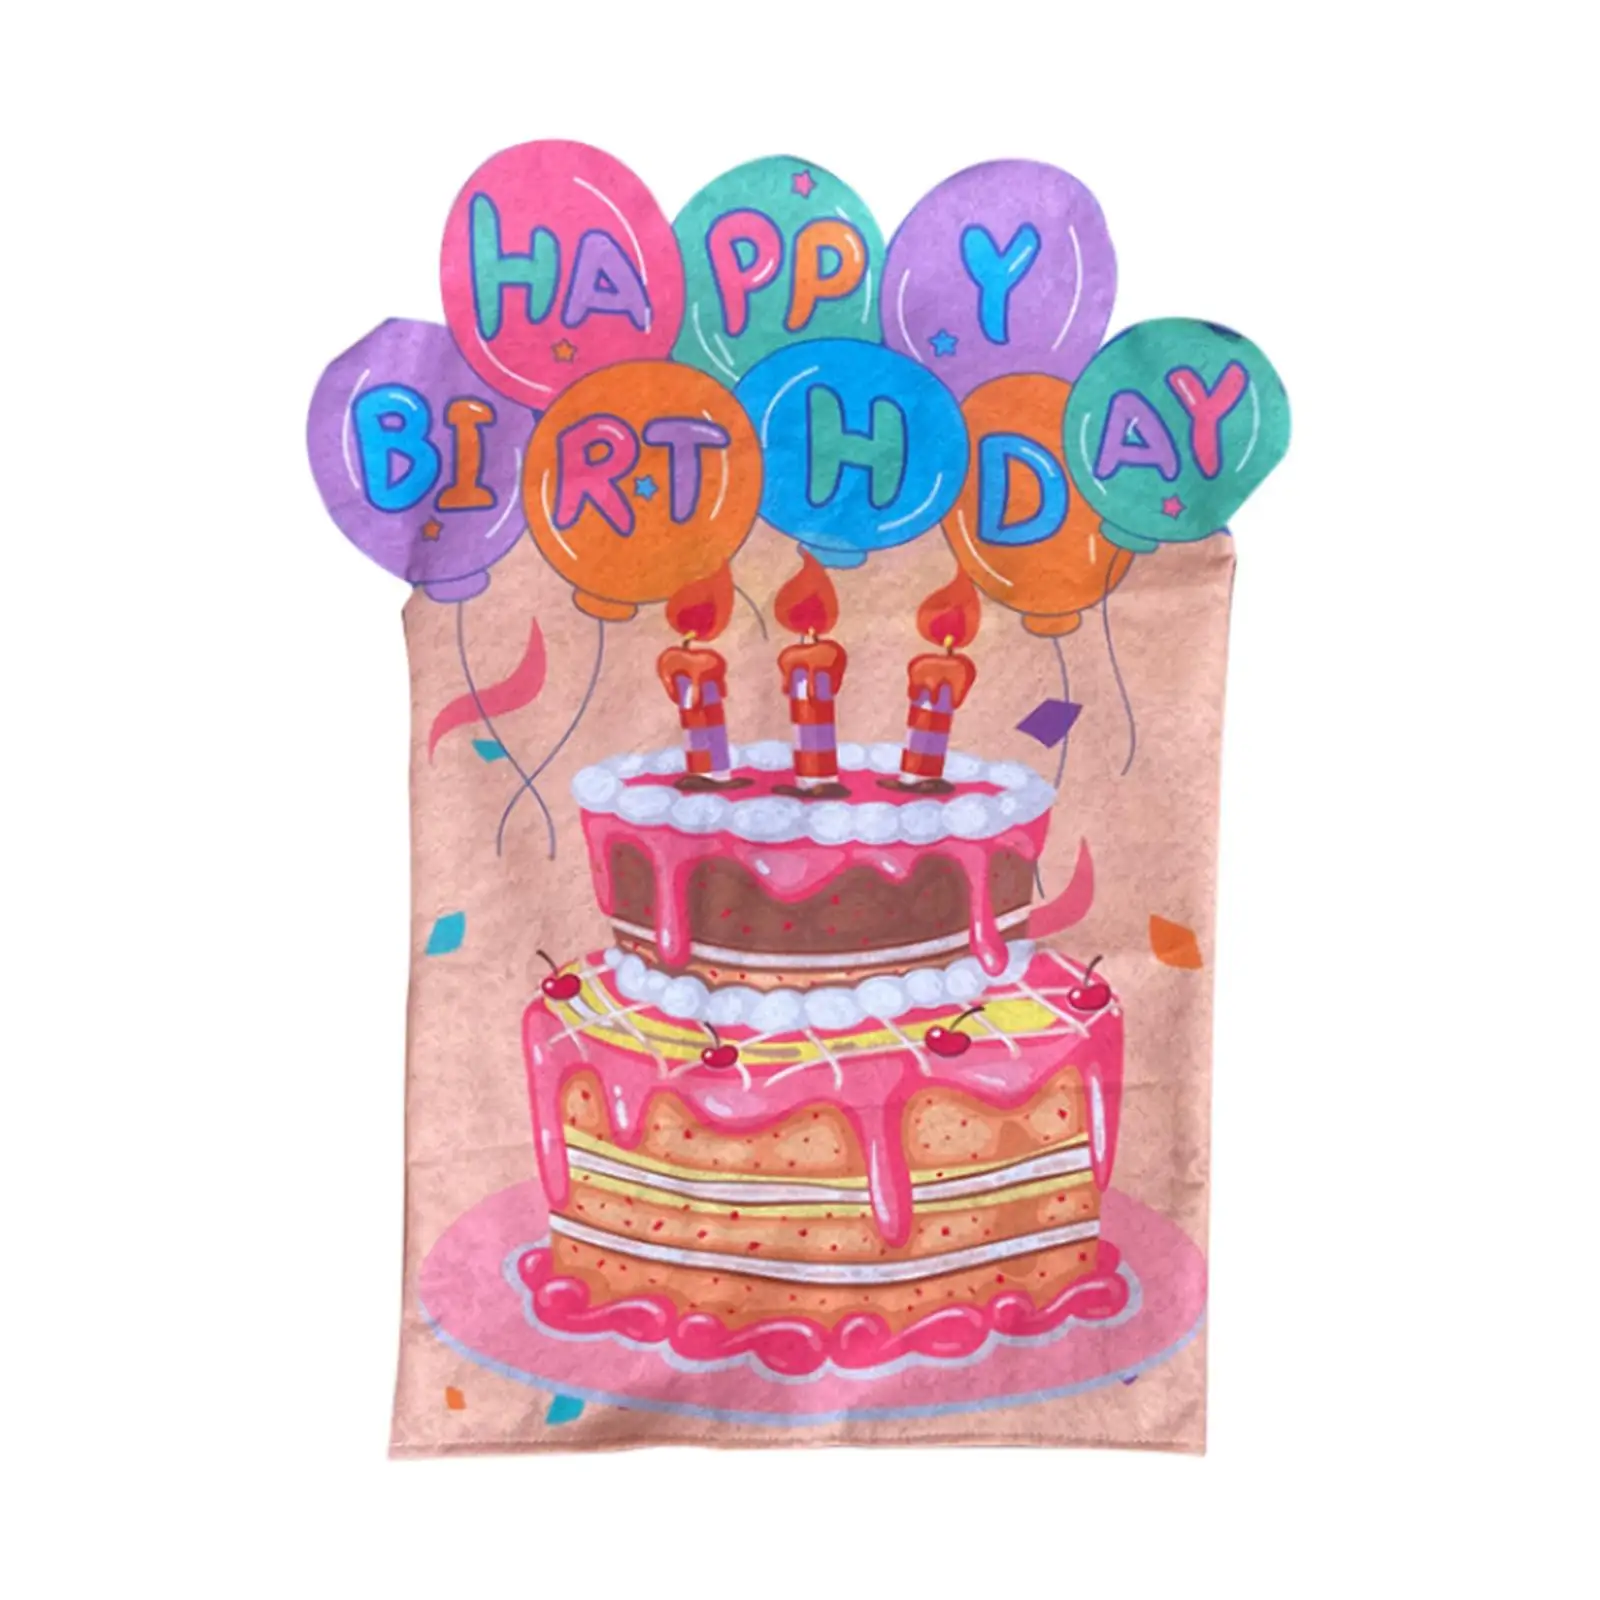 Birthday Chair cover 25